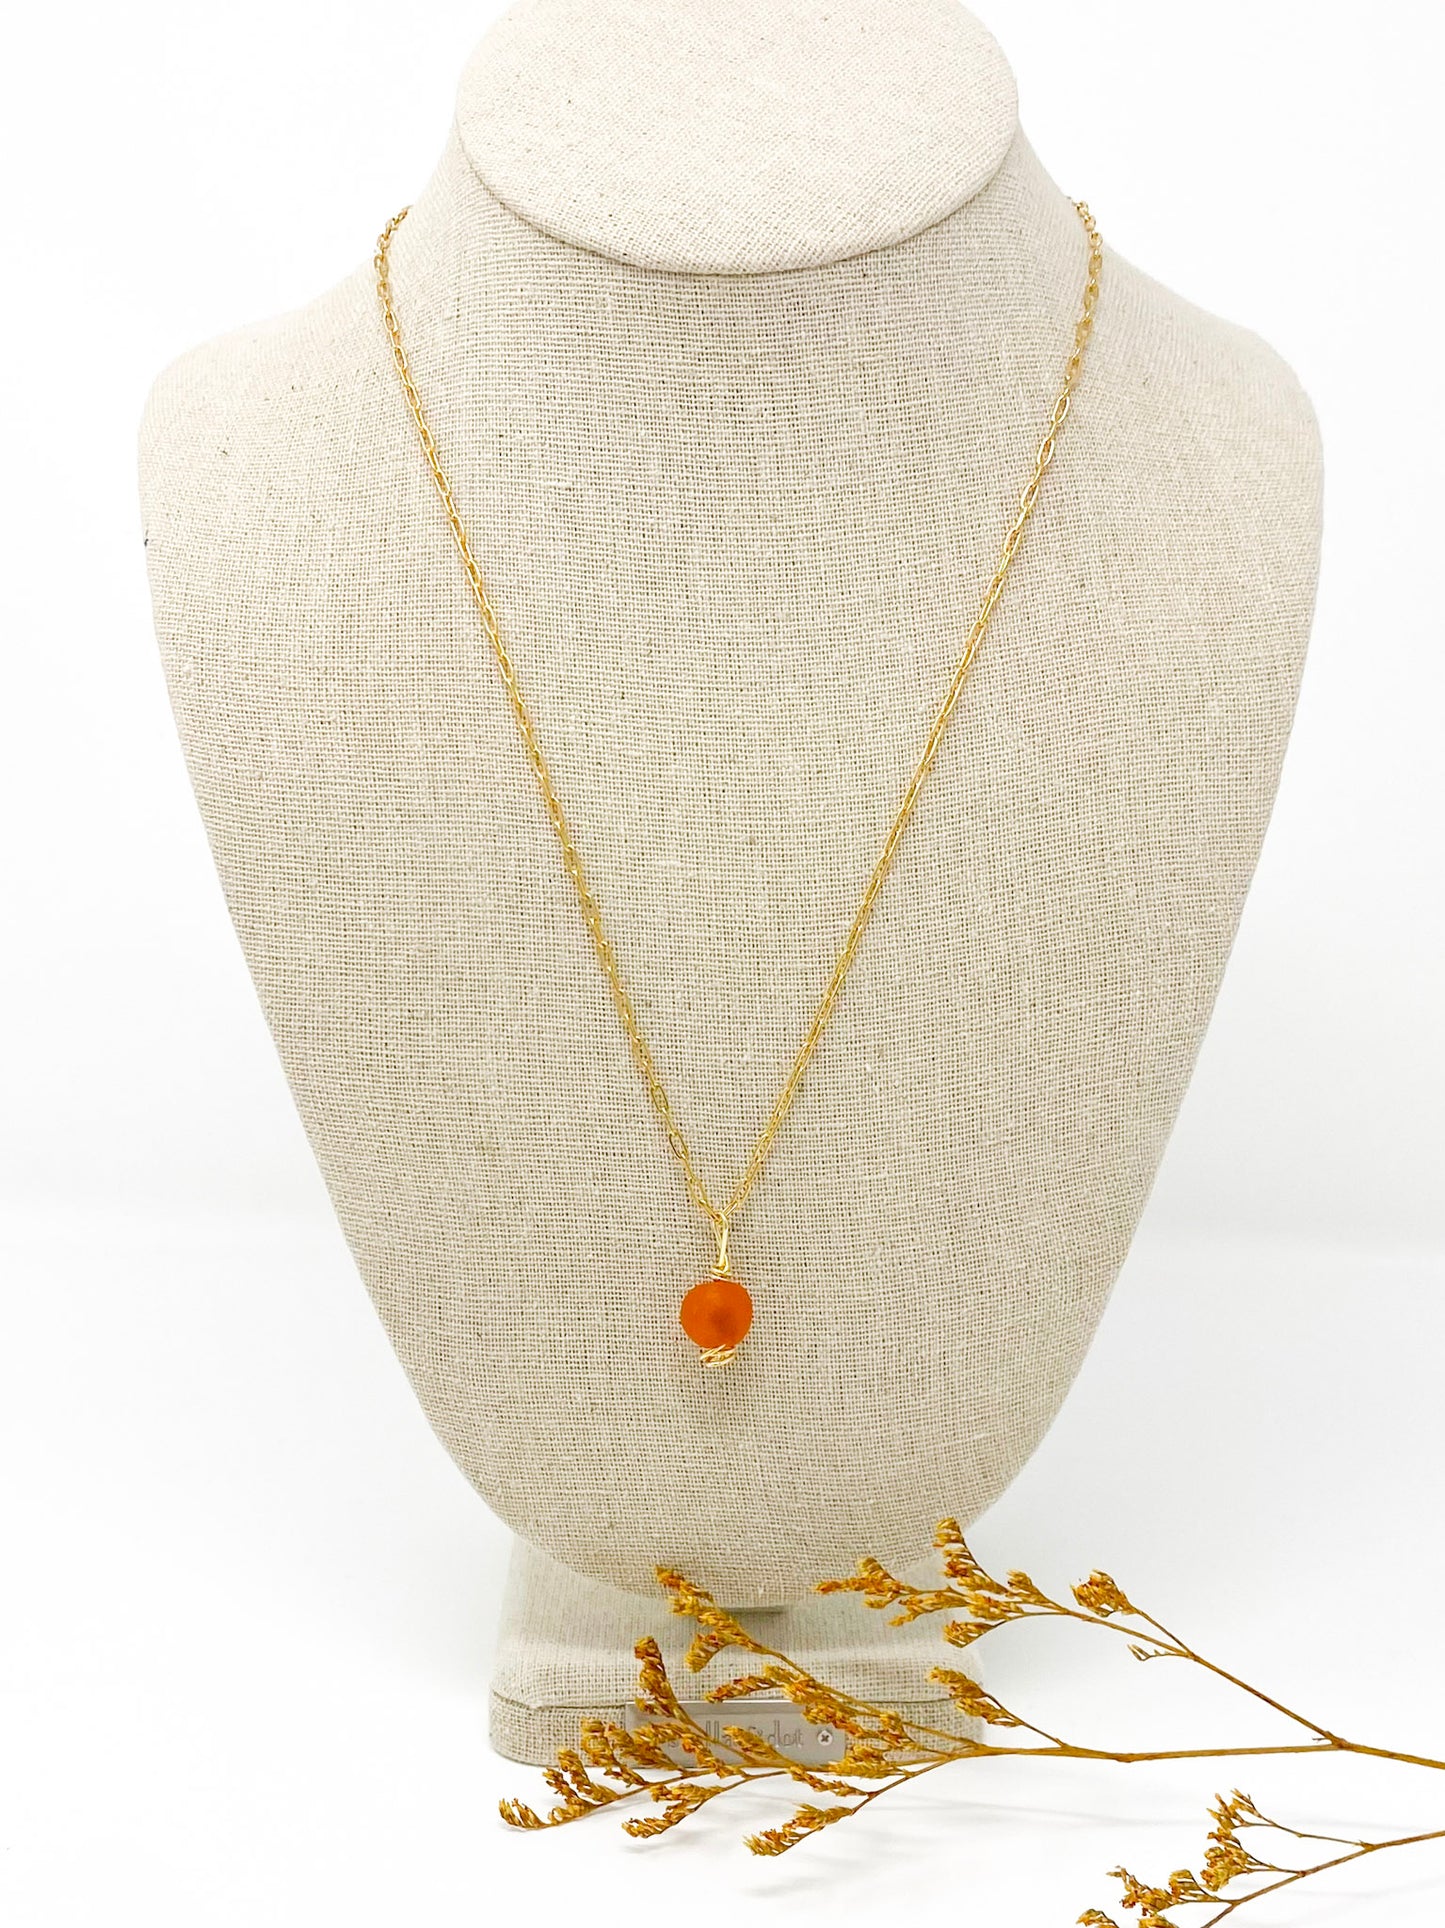 Minimalist, Chic Recycled Glass Bead Single Strand Necklace